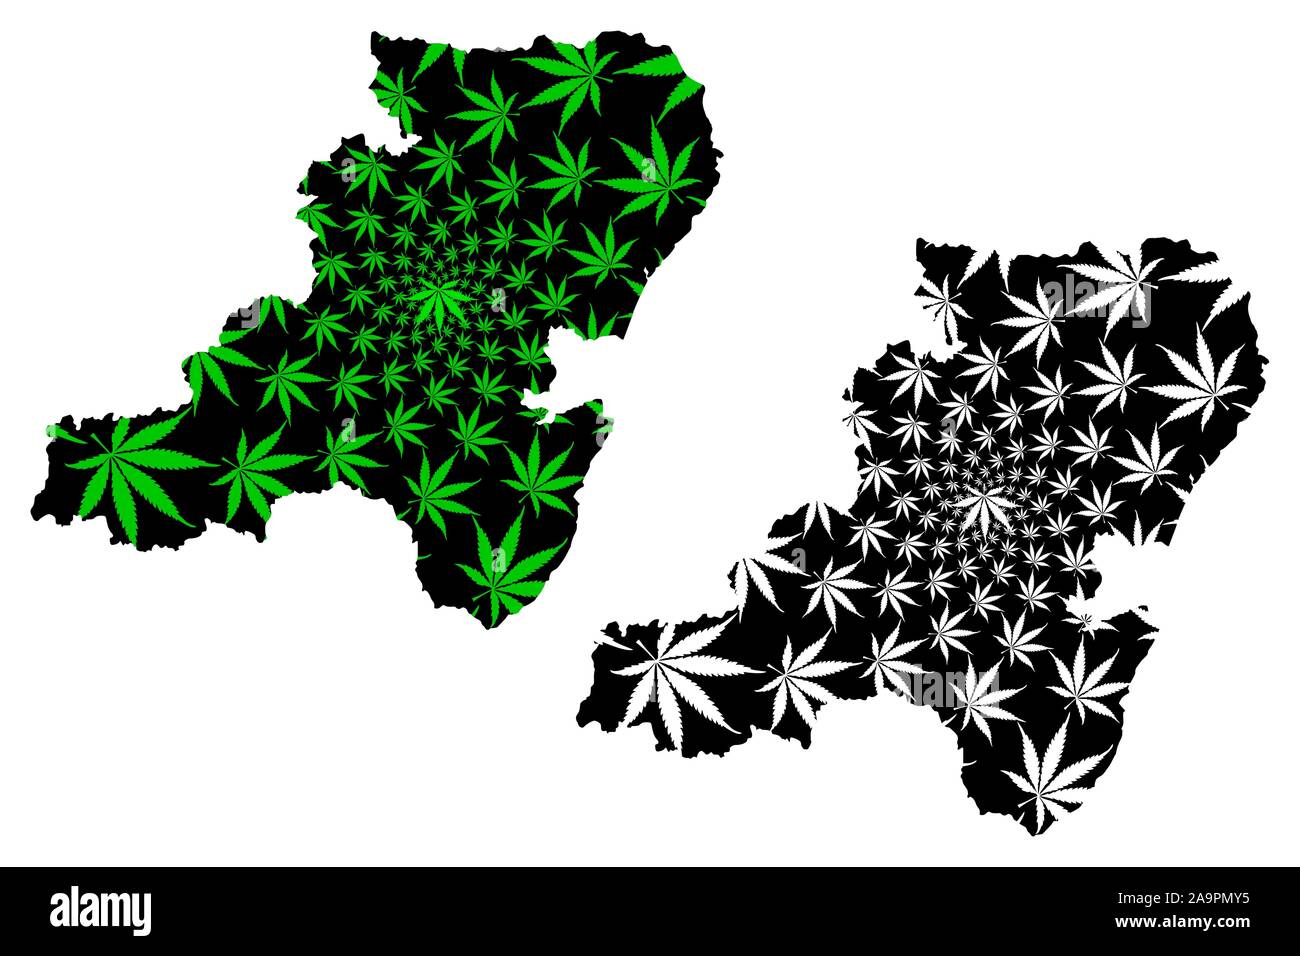 Aberdeenshire (United Kingdom, Scotland, Local government in Scotland) map is designed cannabis leaf green and black, Aberdeenshire map made of mariju Stock Vector